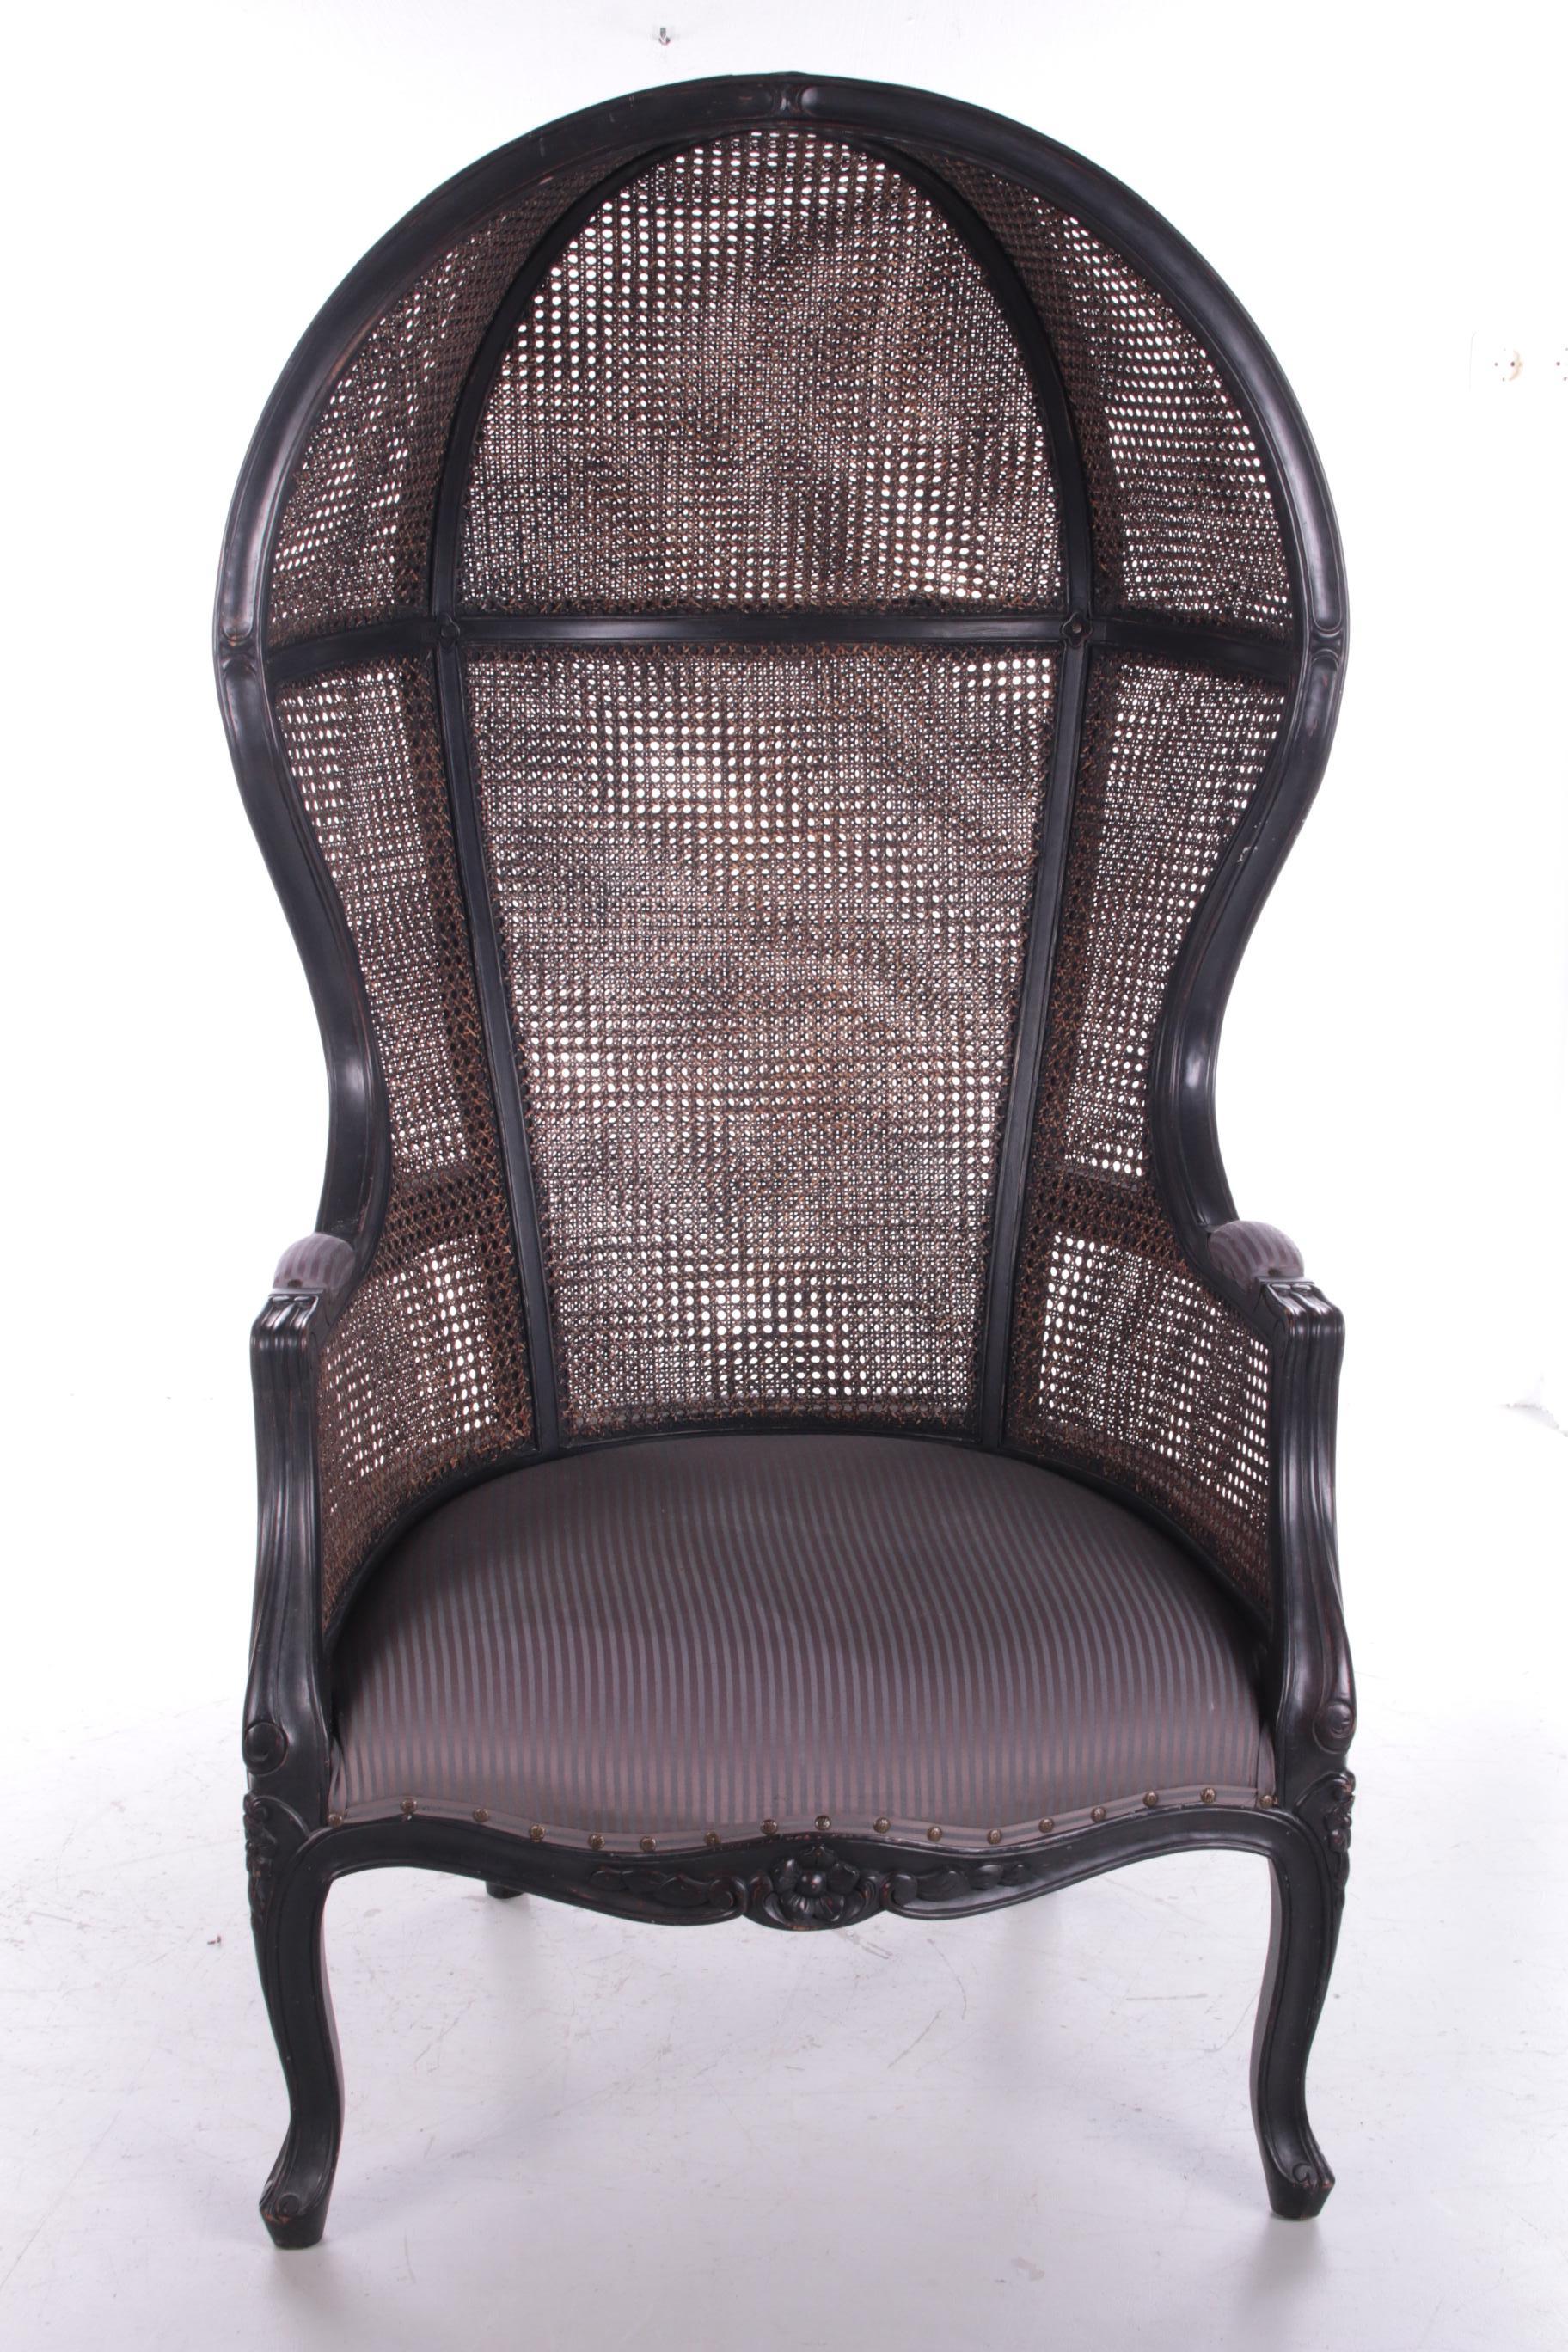 French Vintage Birdcage chair made of rattan, 1960

This is a beautiful crazy chair, also called bird cage chair.

This of course because of the large 